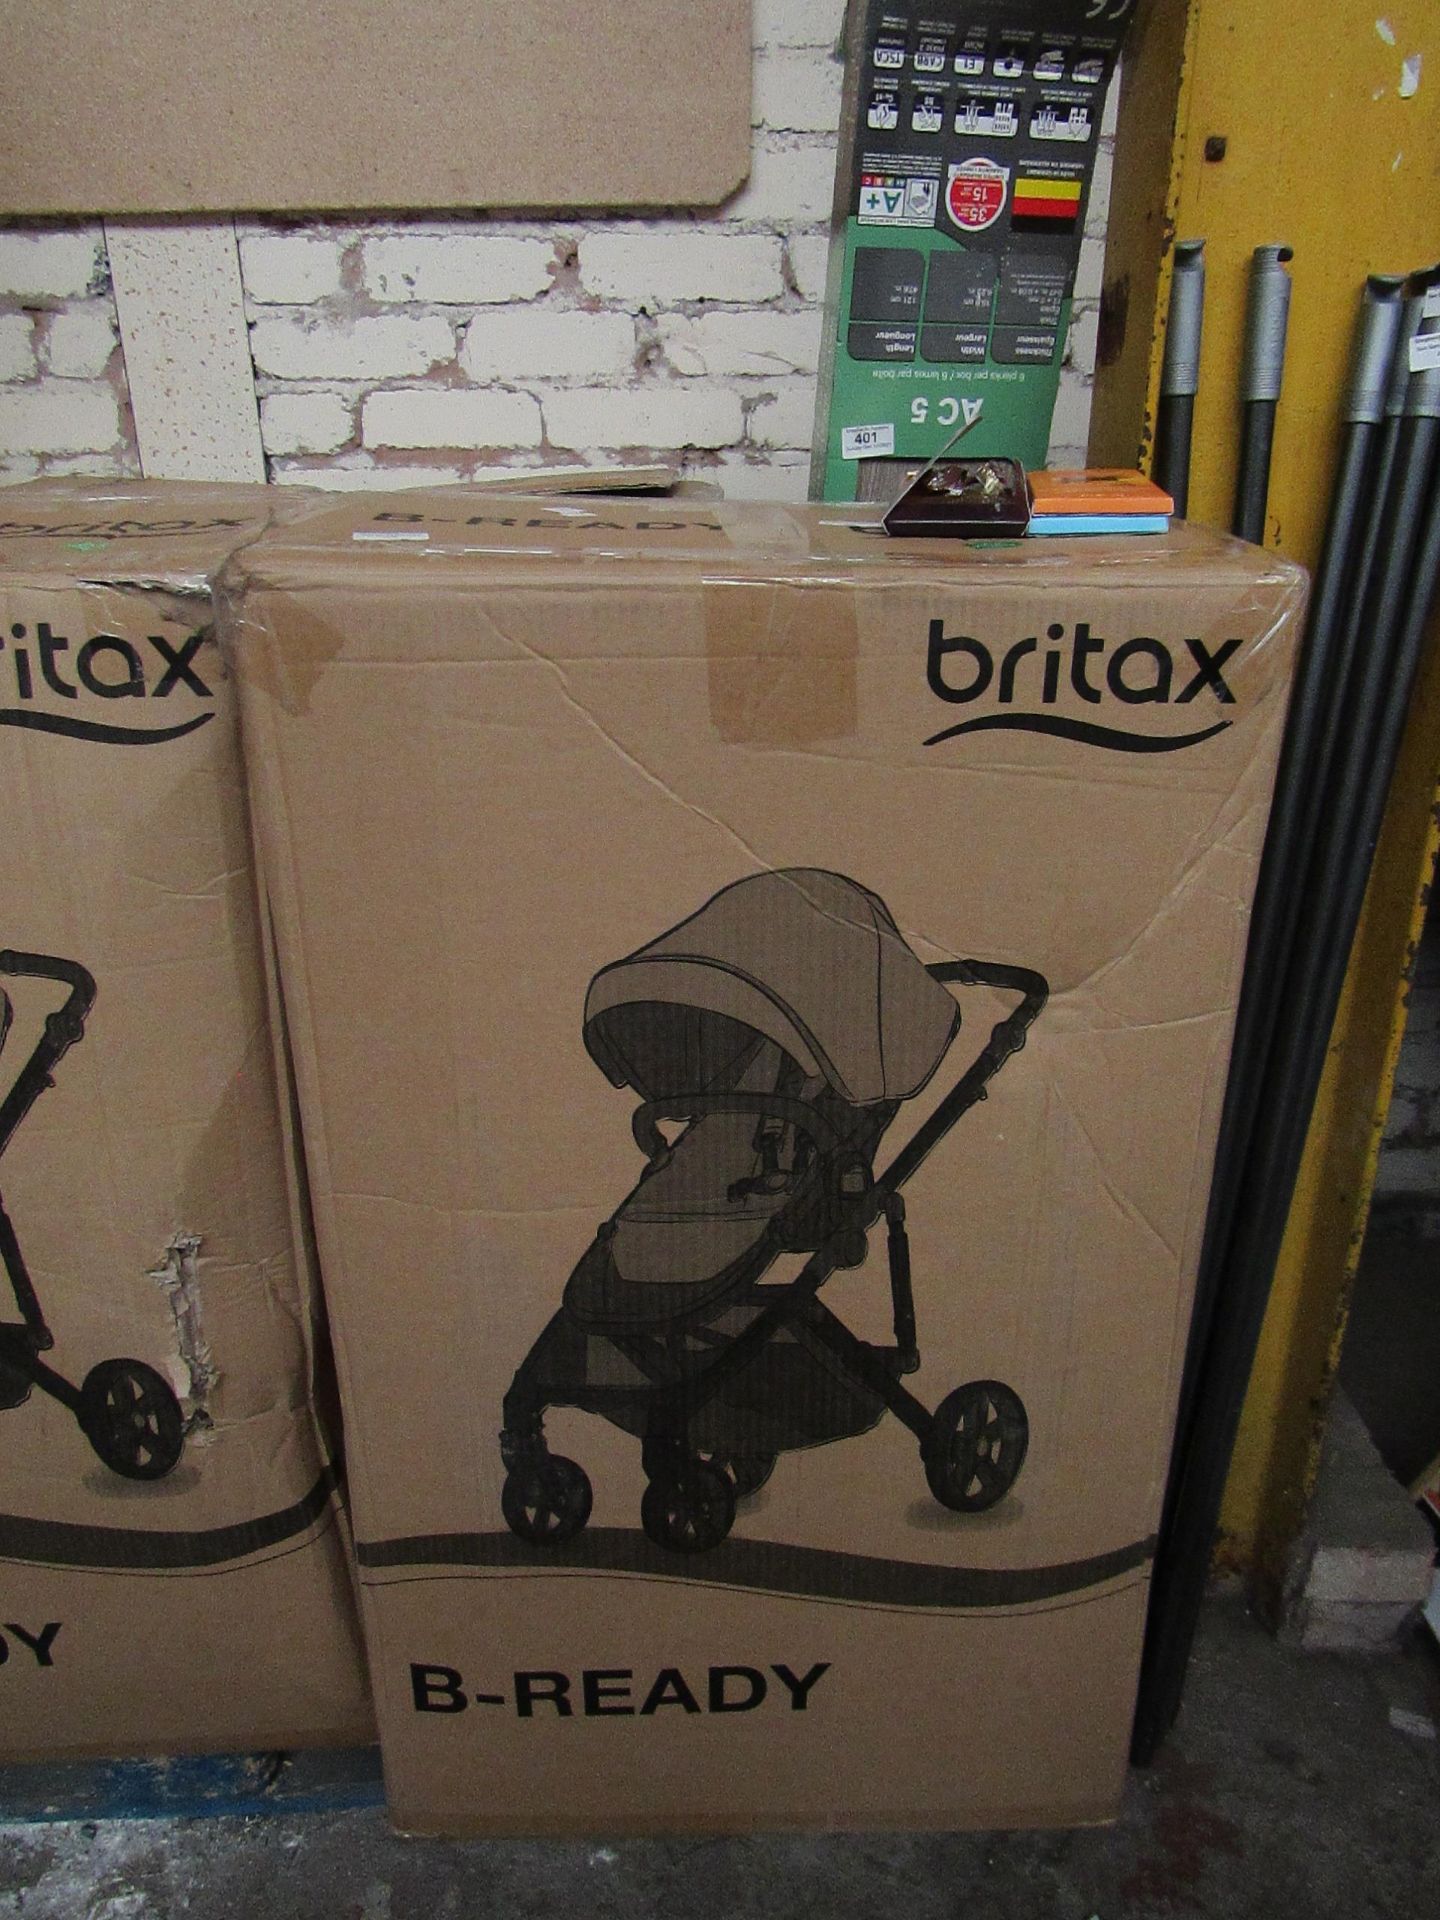 1x Britax - B-Ready Pushchair - Mineral Purple/Slate - Unchecked & Boxed - RRP œ450.